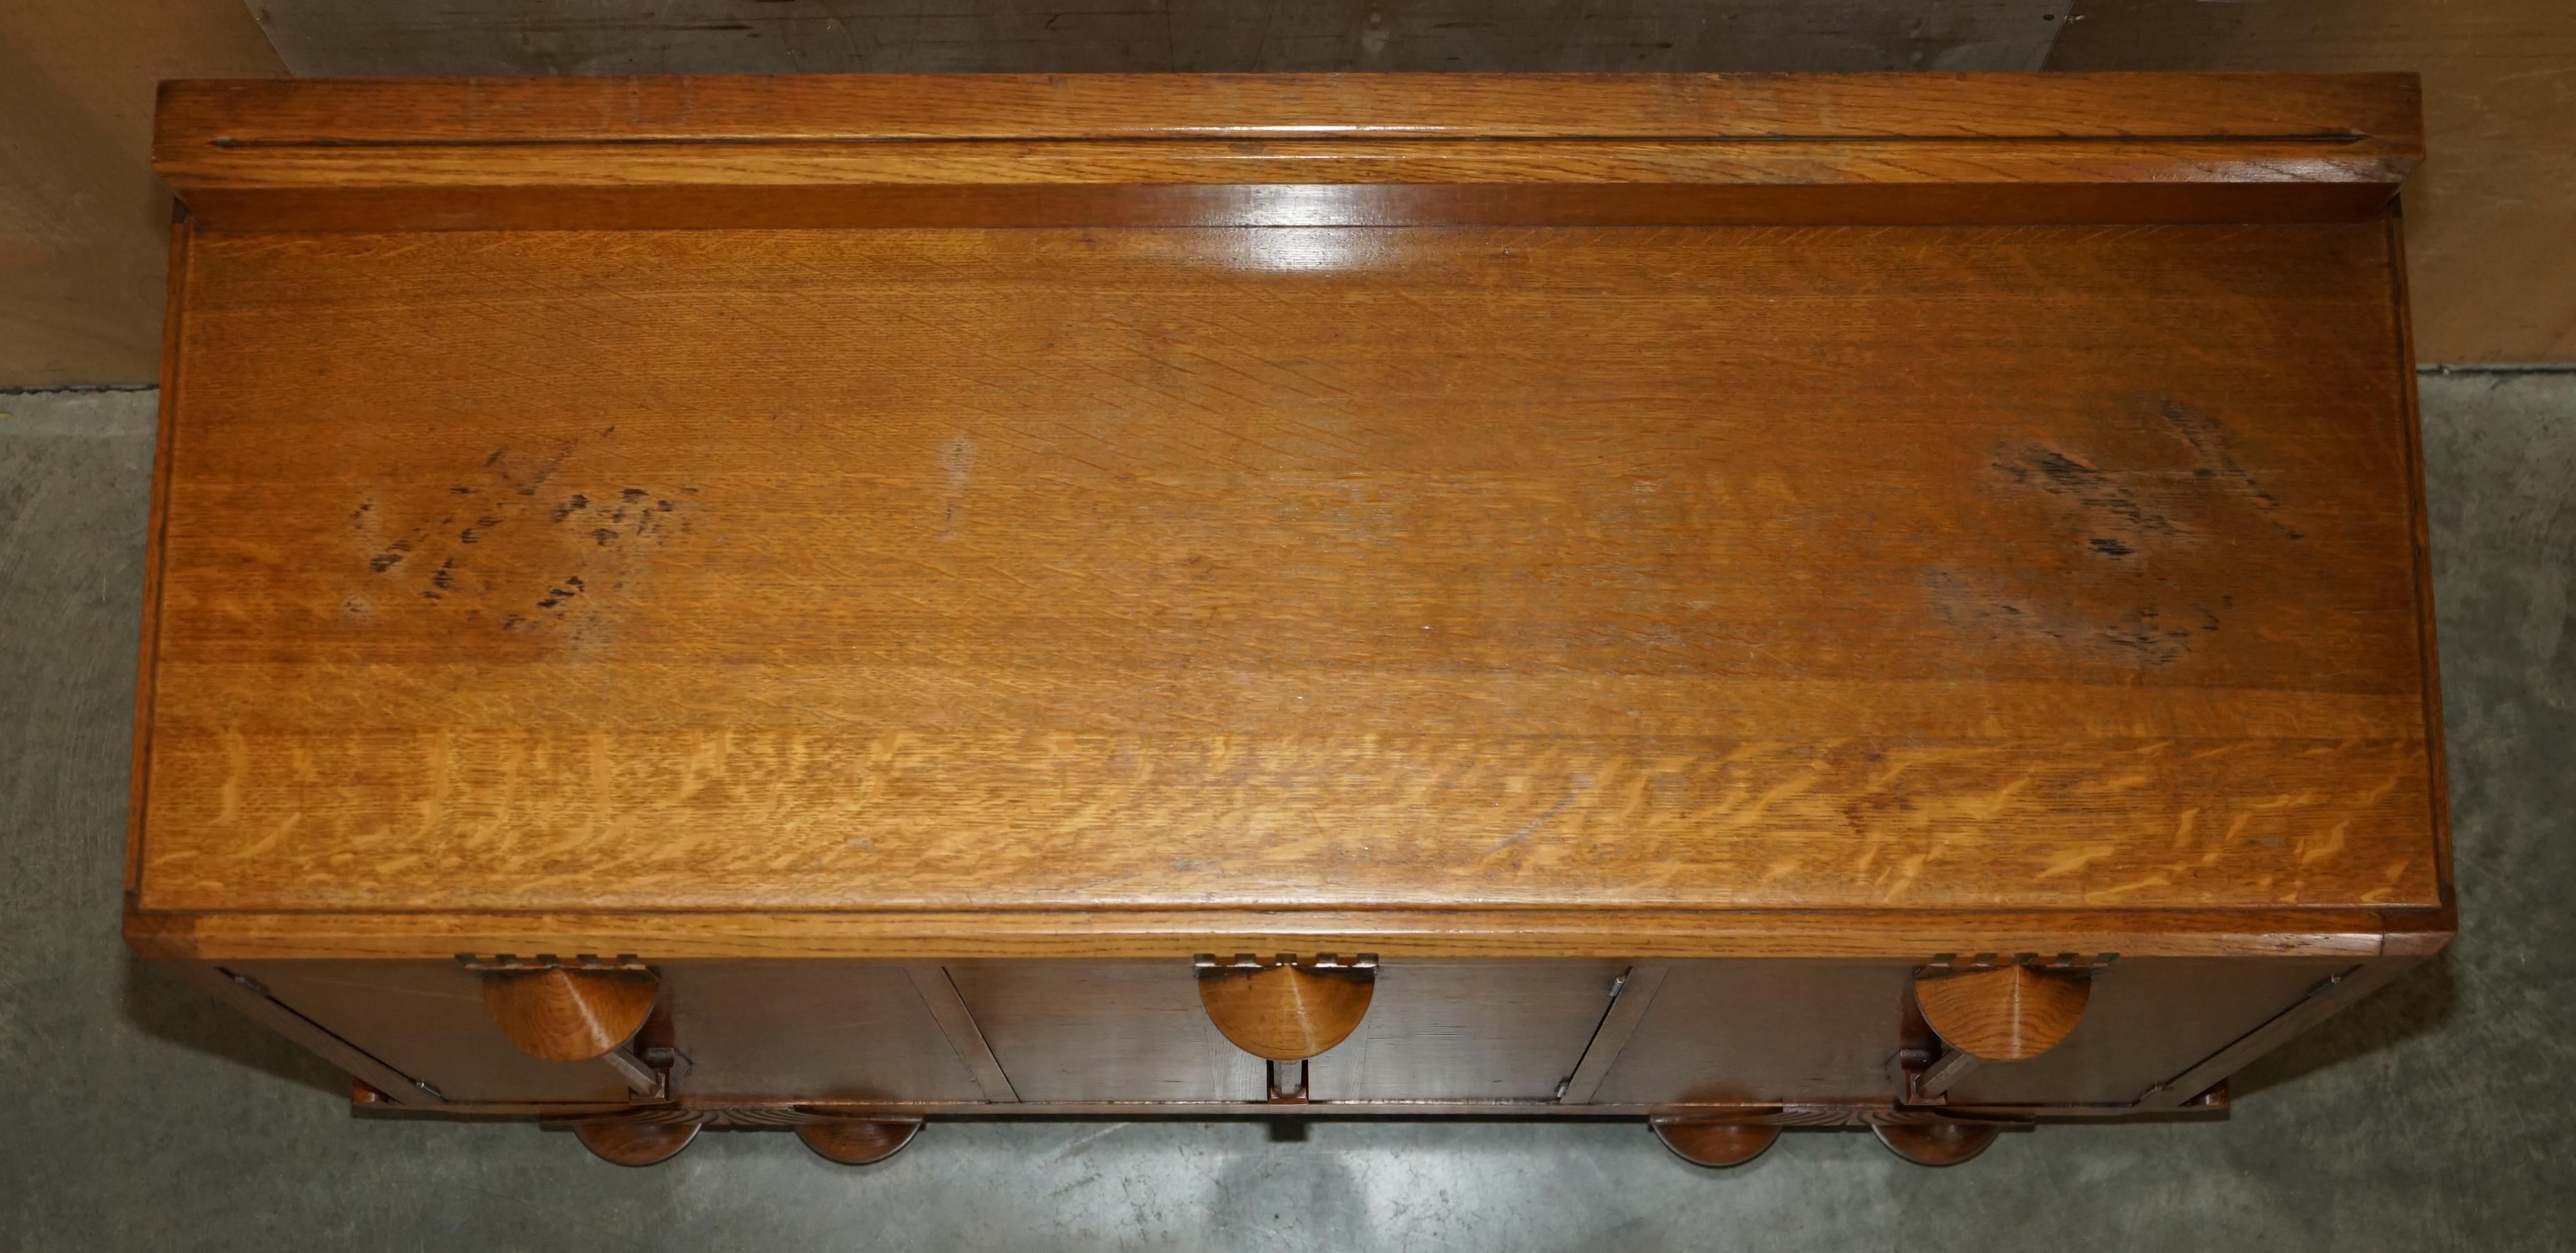 FINE LIBERTY'S COTSWOLD ART DECO OAK CARVED SiDEBOARD CIRCA 1920 PART OF A SUITE For Sale 5